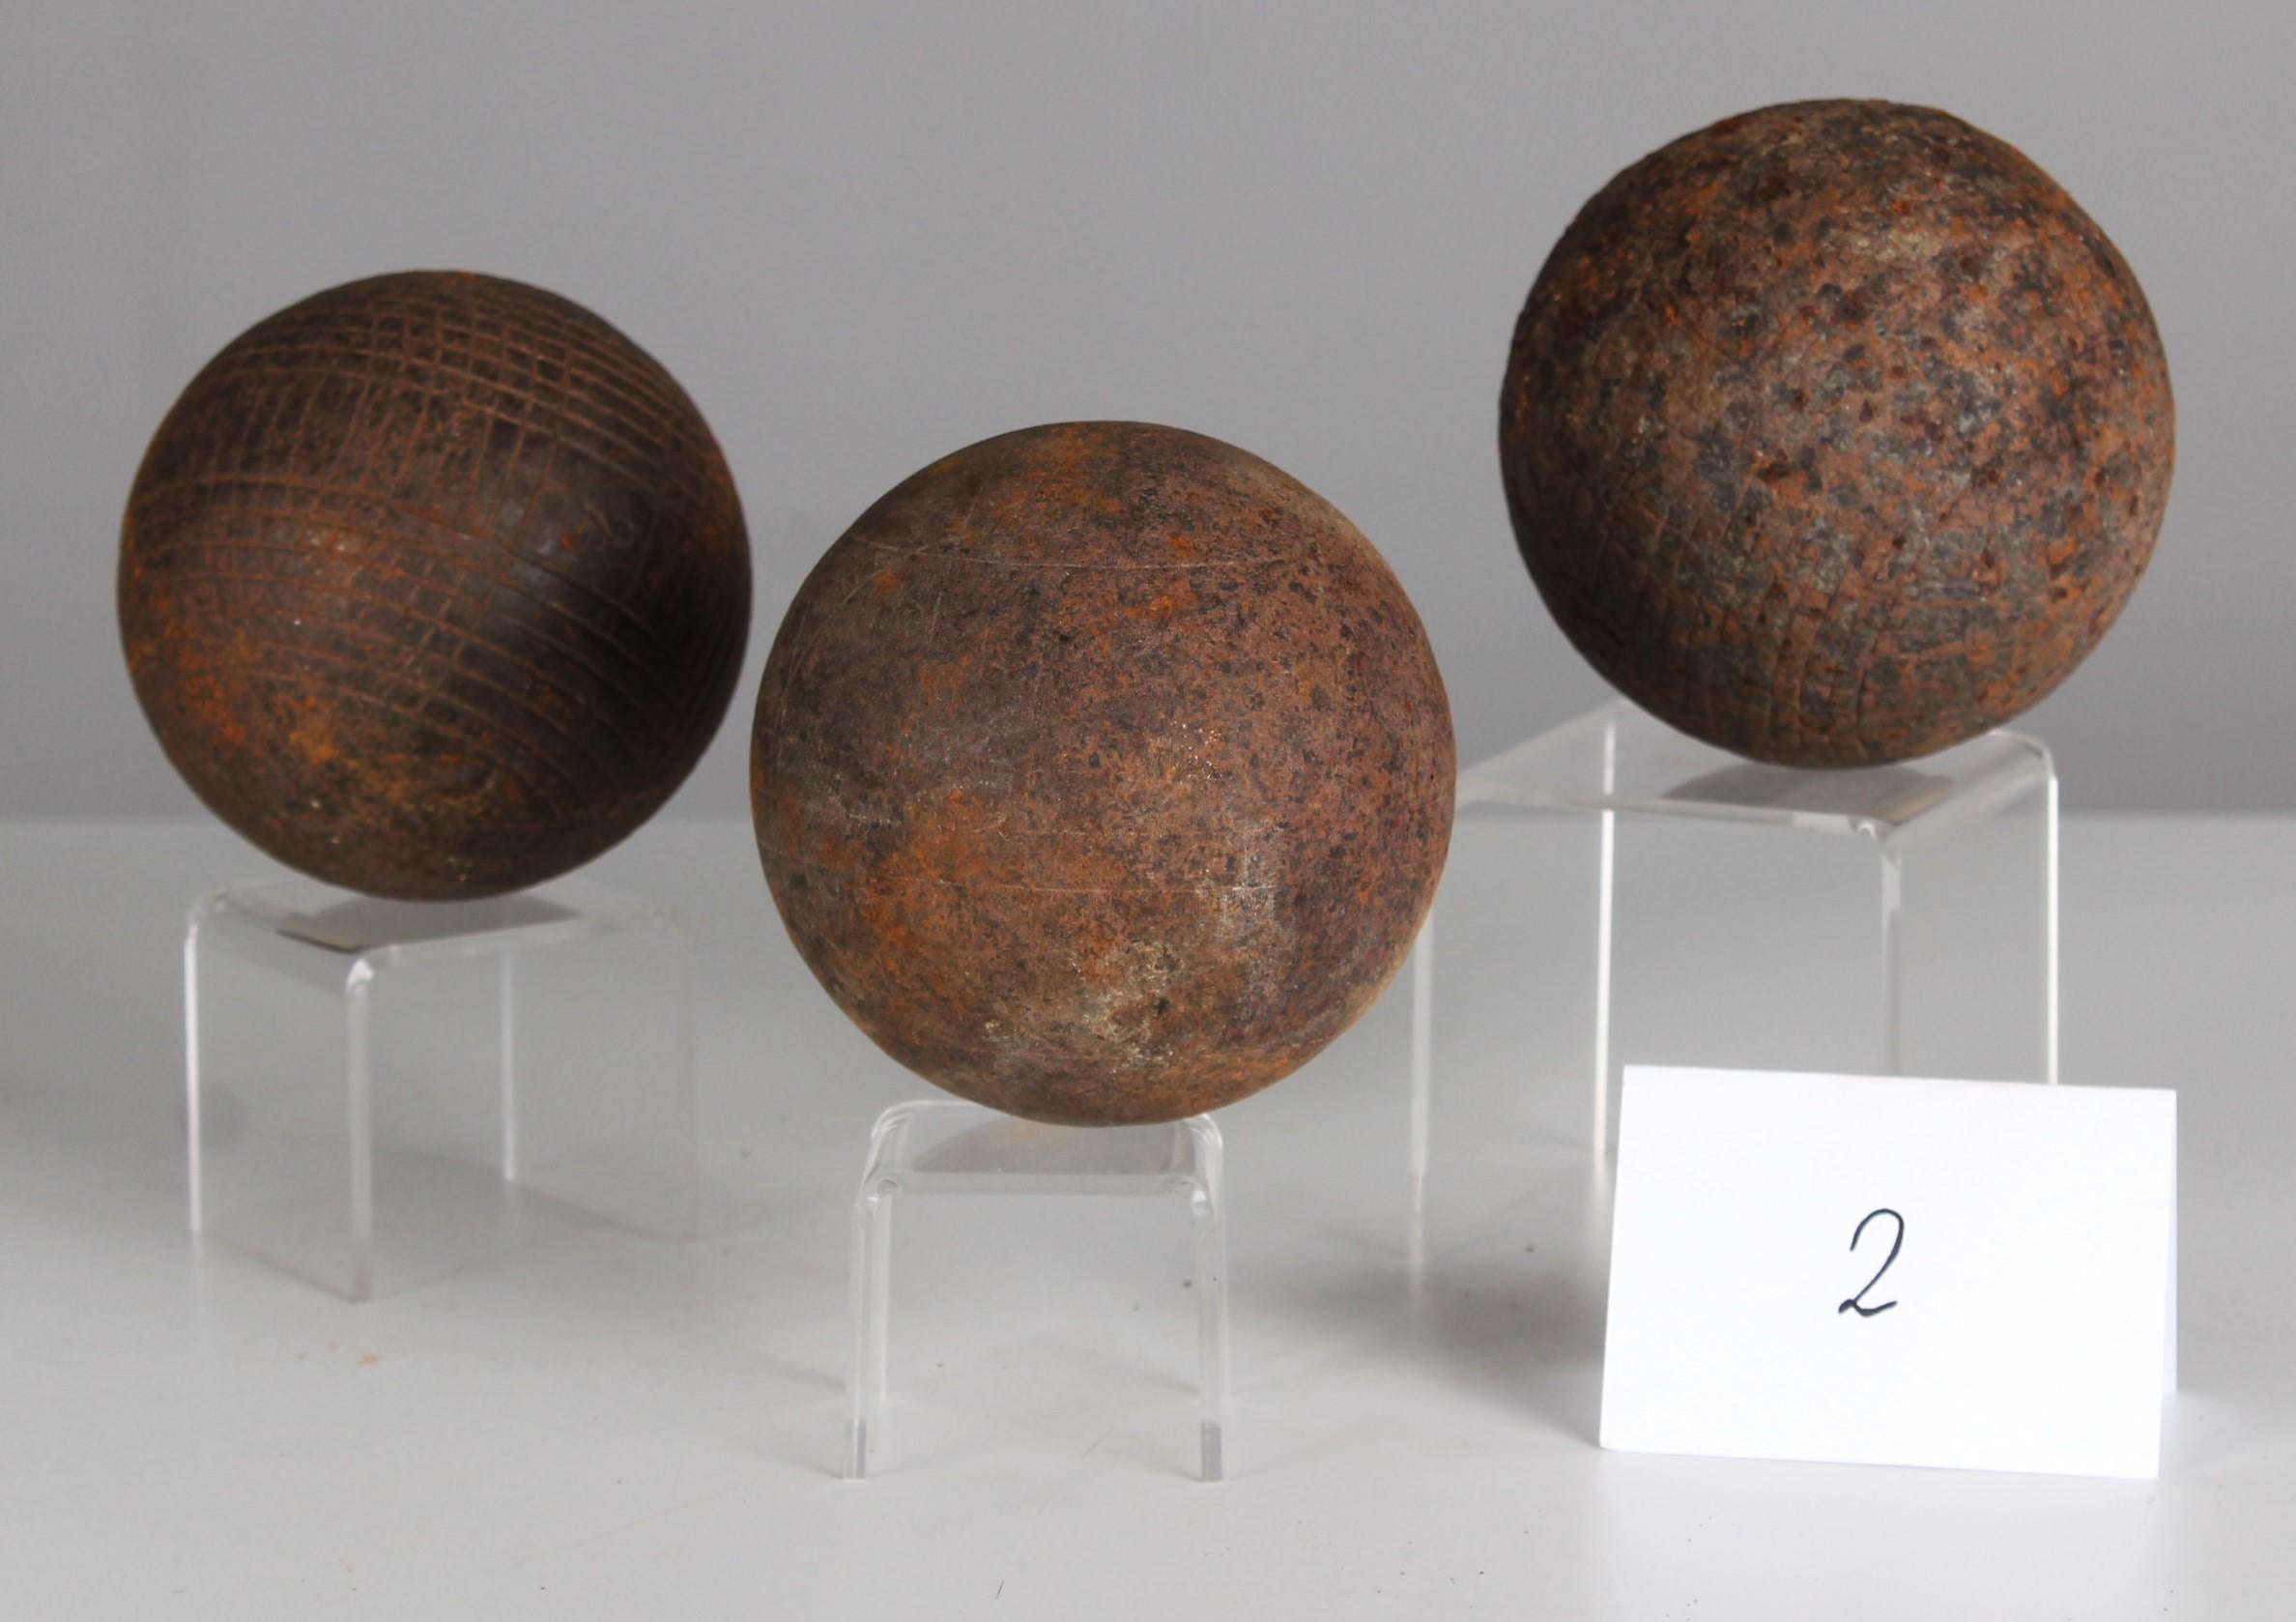 Beautiful, unique Boule set of three Boule balls and one target ball, France, late 19th Century.
Diameter 8,5 cm.

Fantastic colour and patina!

In the 19th century, antique metal boules balls experienced a renaissance that took the game of boules